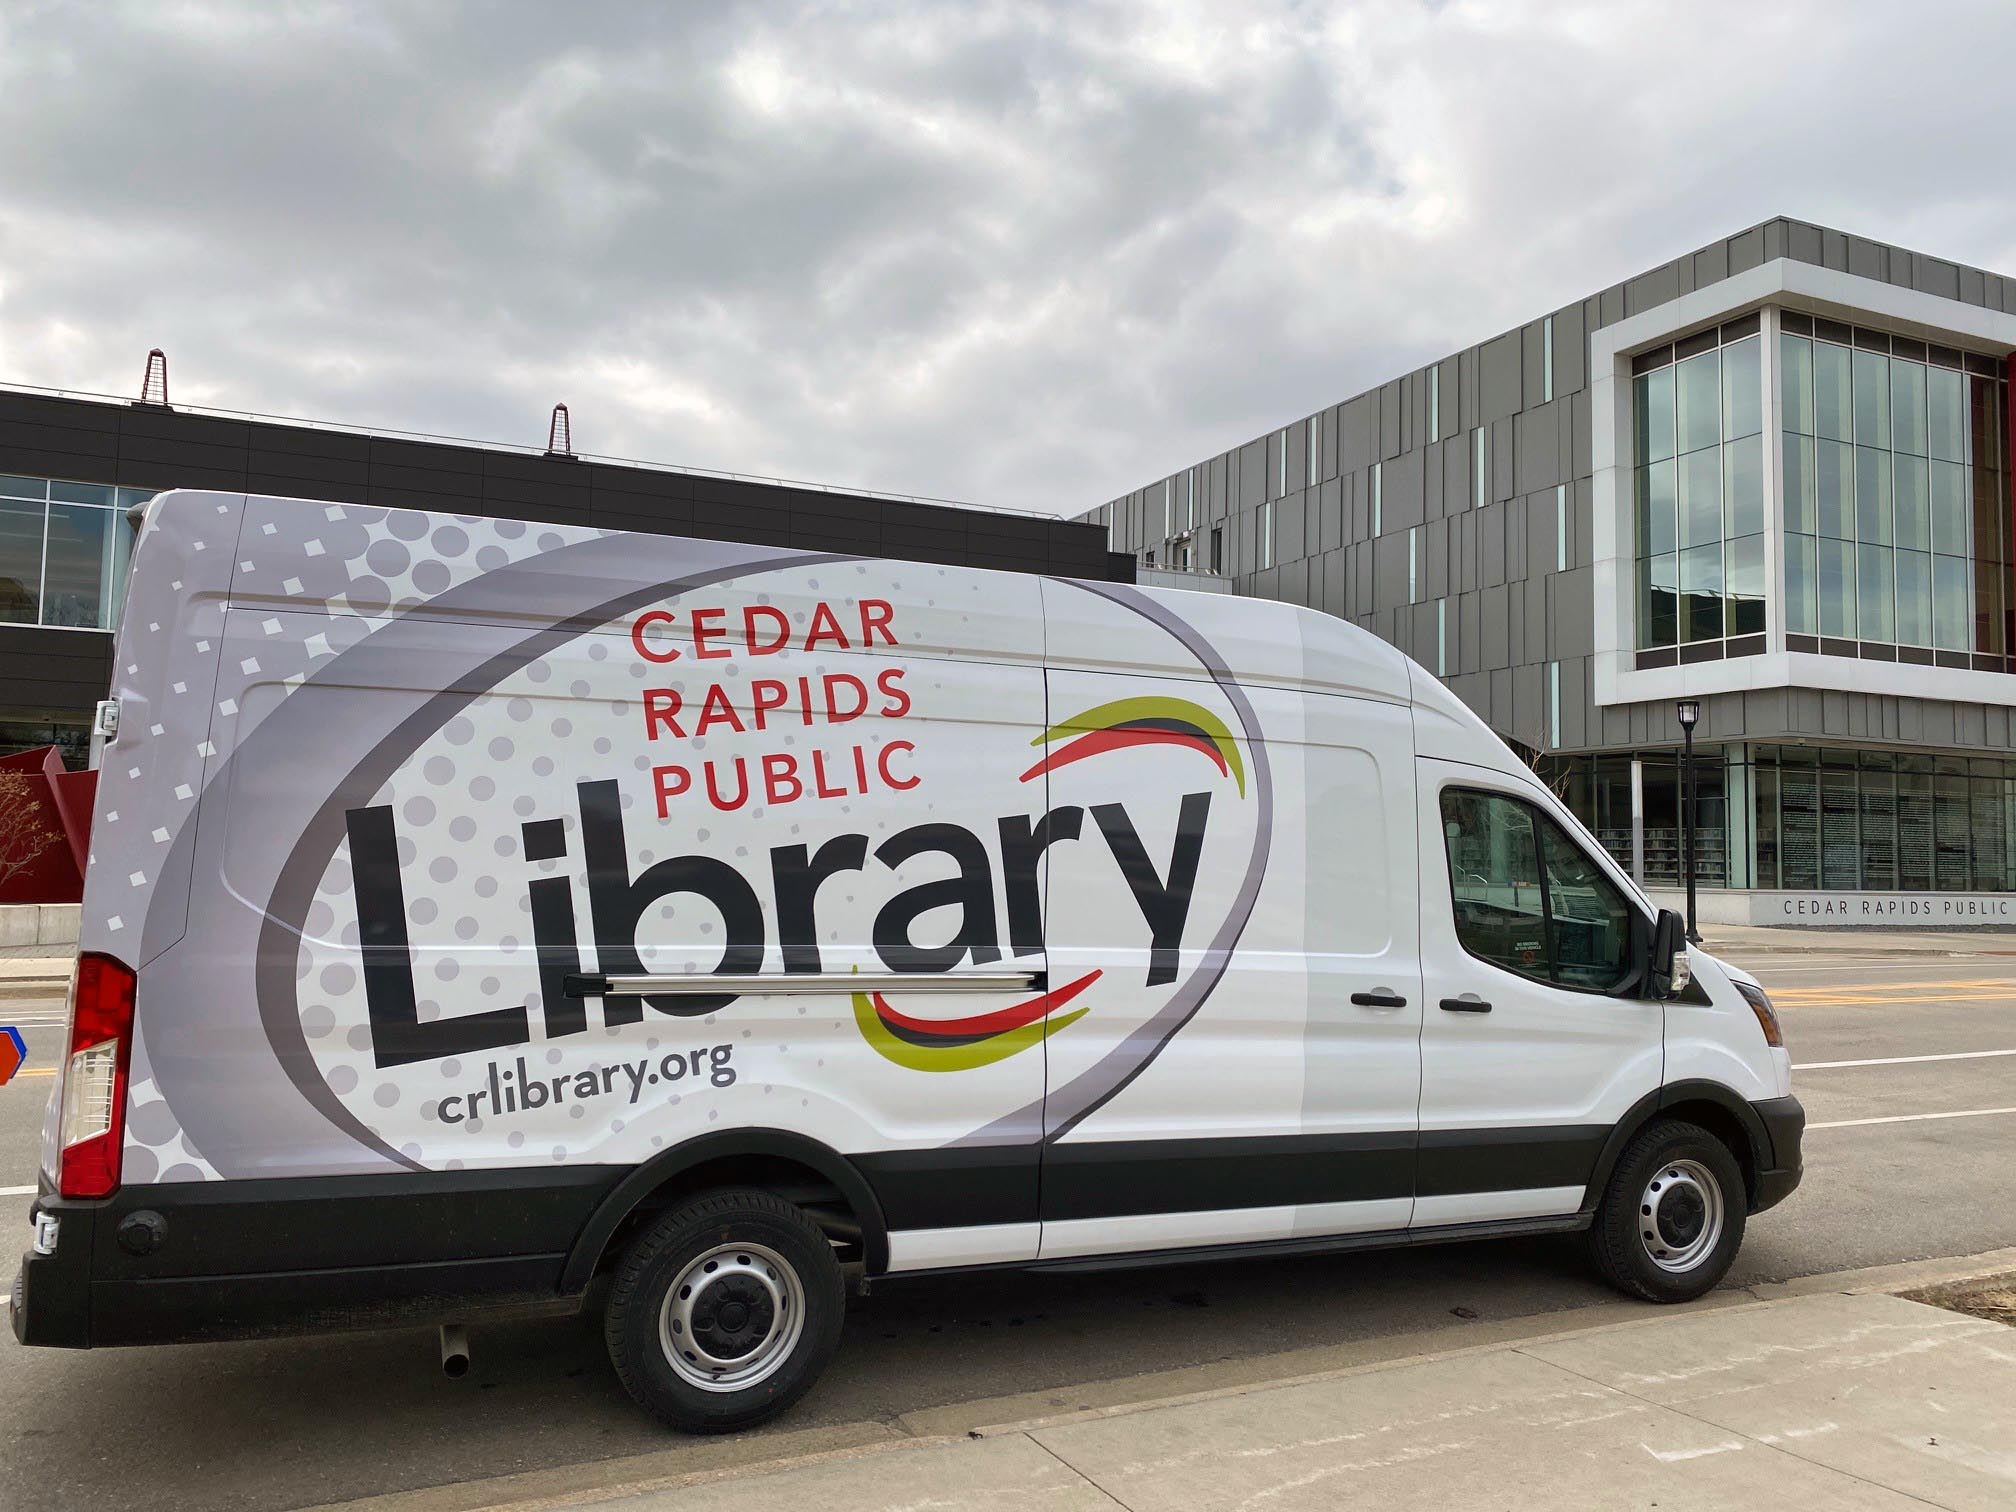 Large extended van used for mobile technology outreach